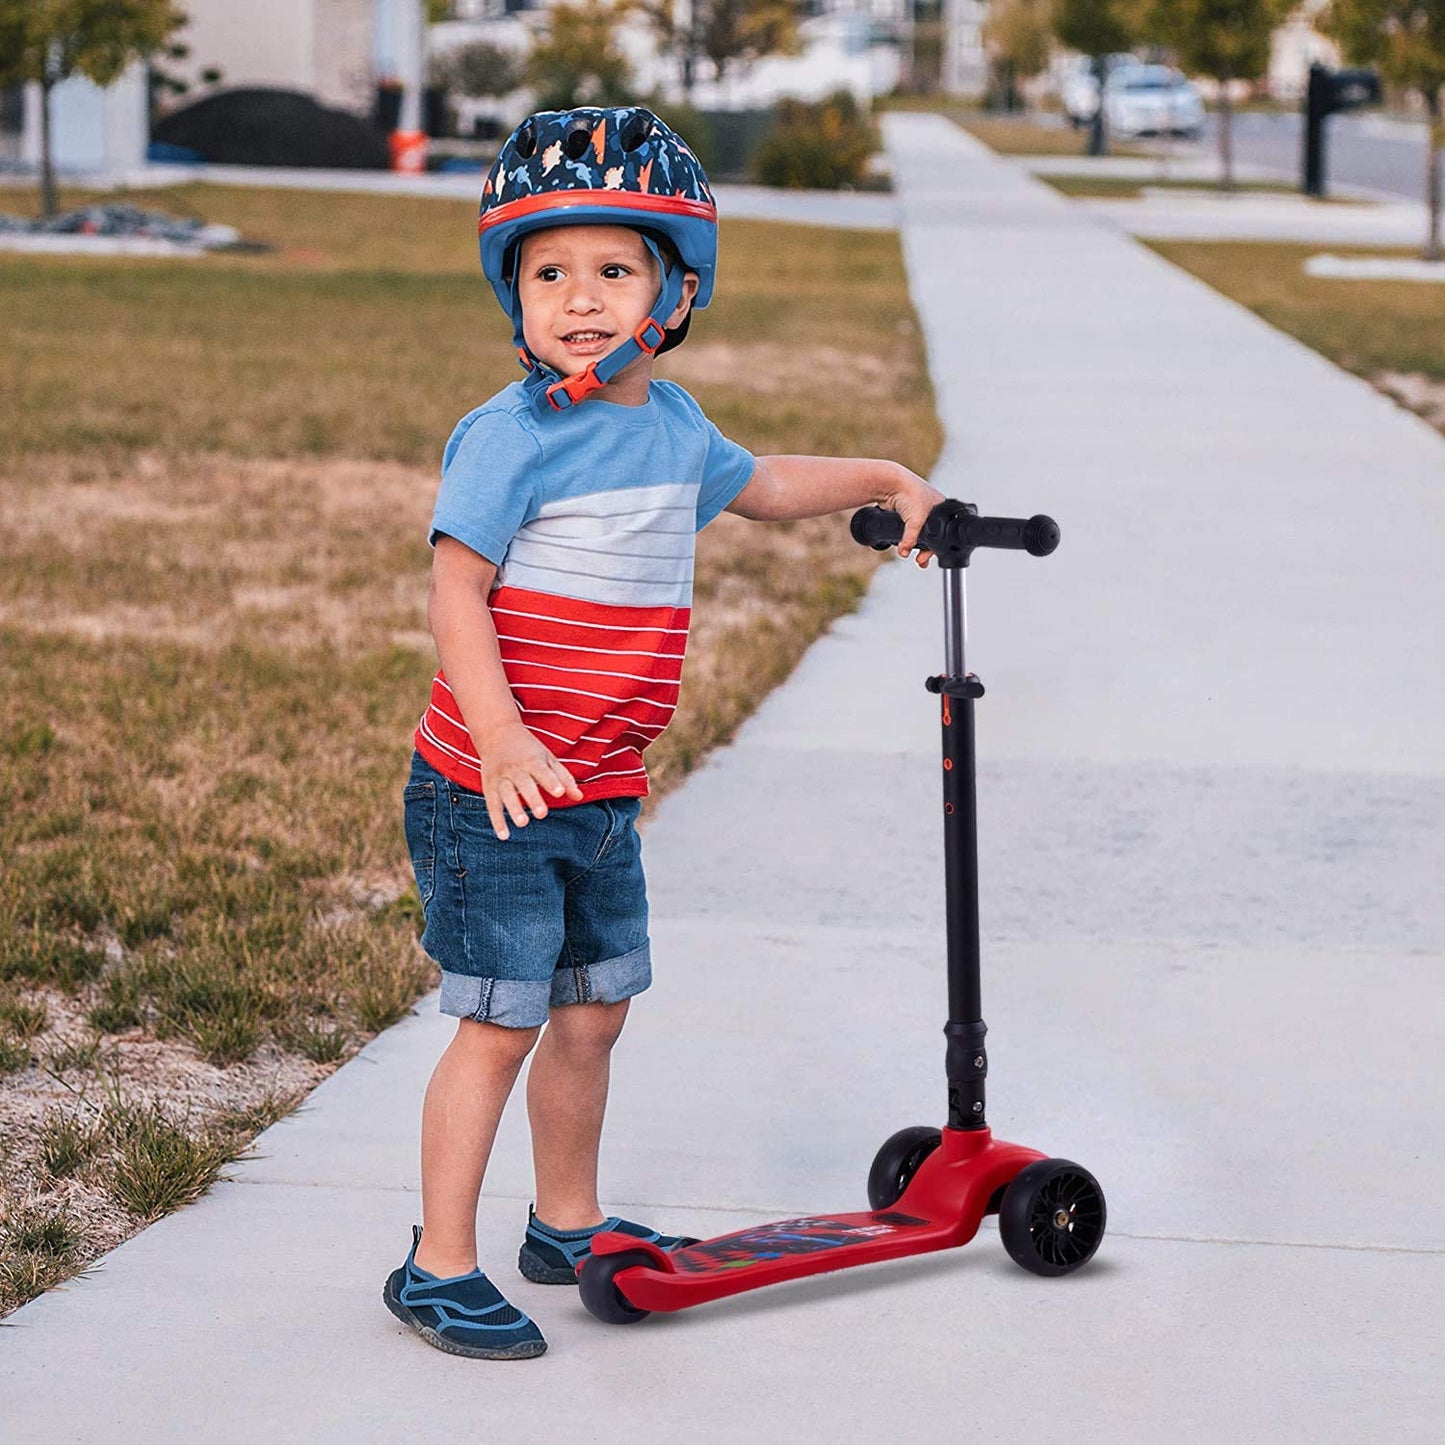 Baybee Speed Force 3 Wheel Kids Skate Scooter with Flashing LED PU Wheels